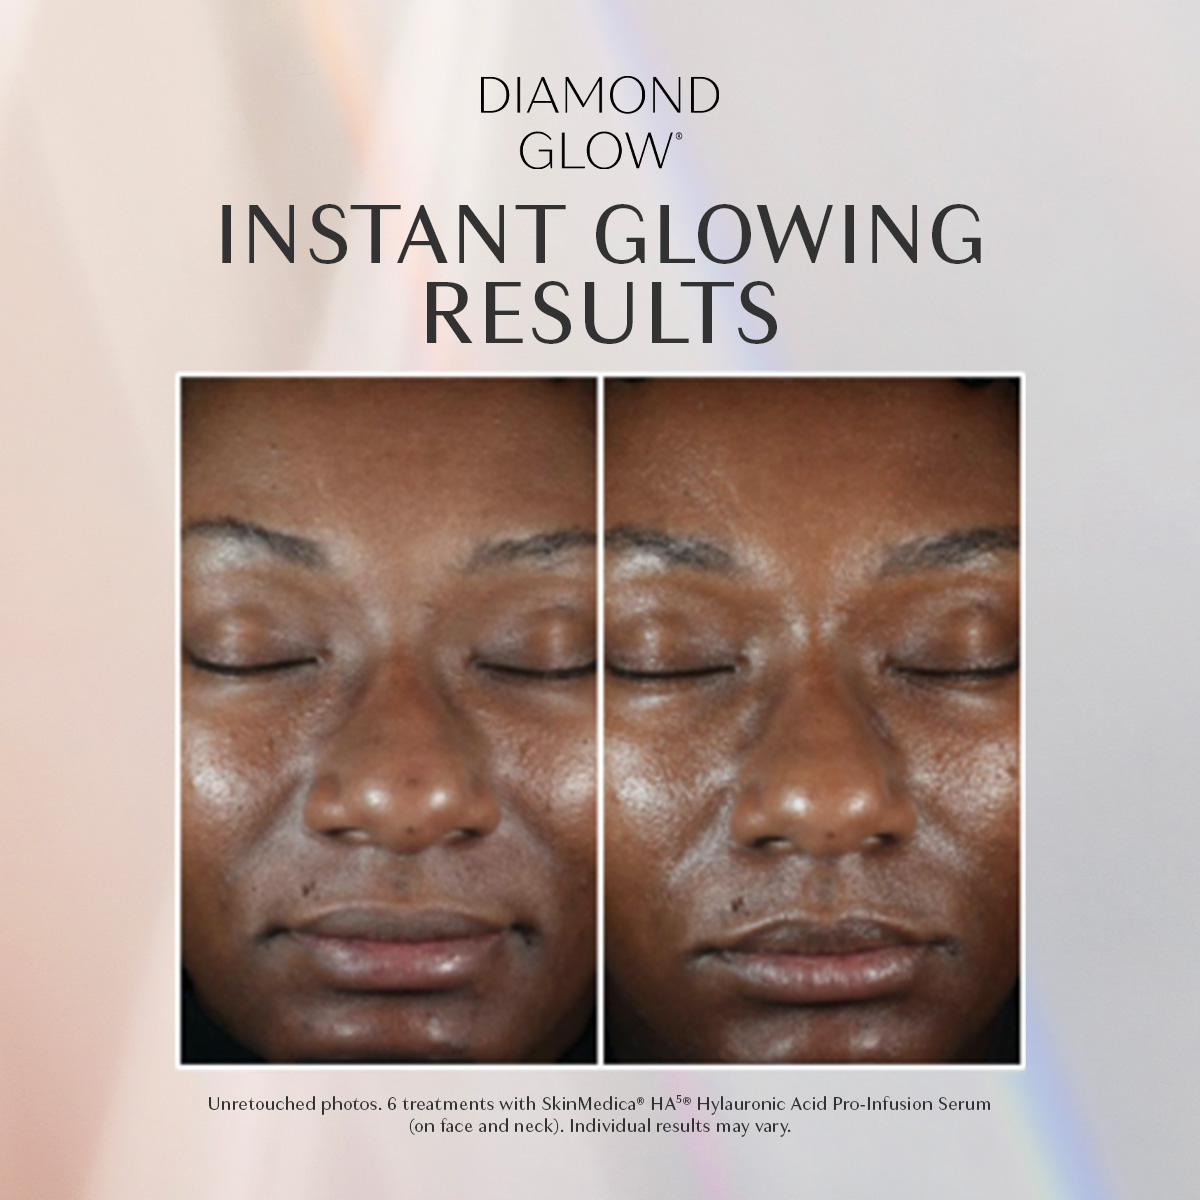 middle aged woman before and after a diamondglow facial